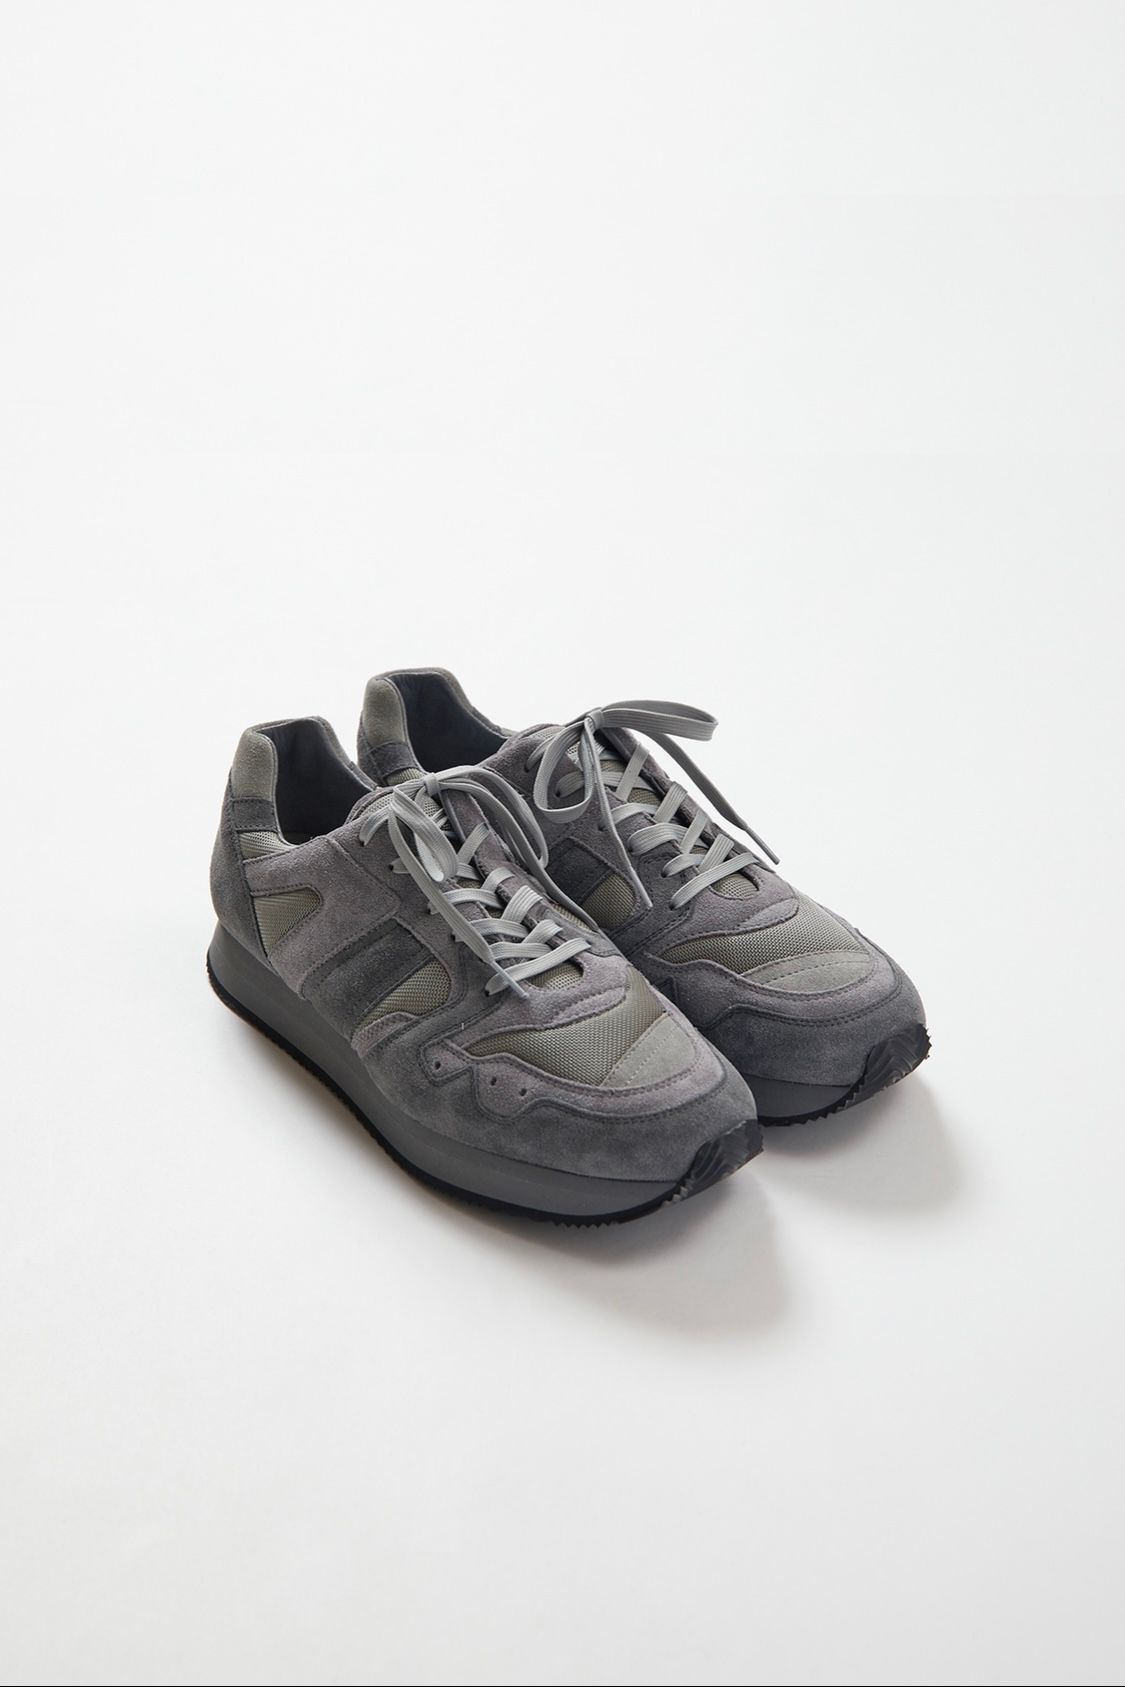 blurhms - rootstock x reproduction of found multi military trainer 9.25発売!  | asterisk